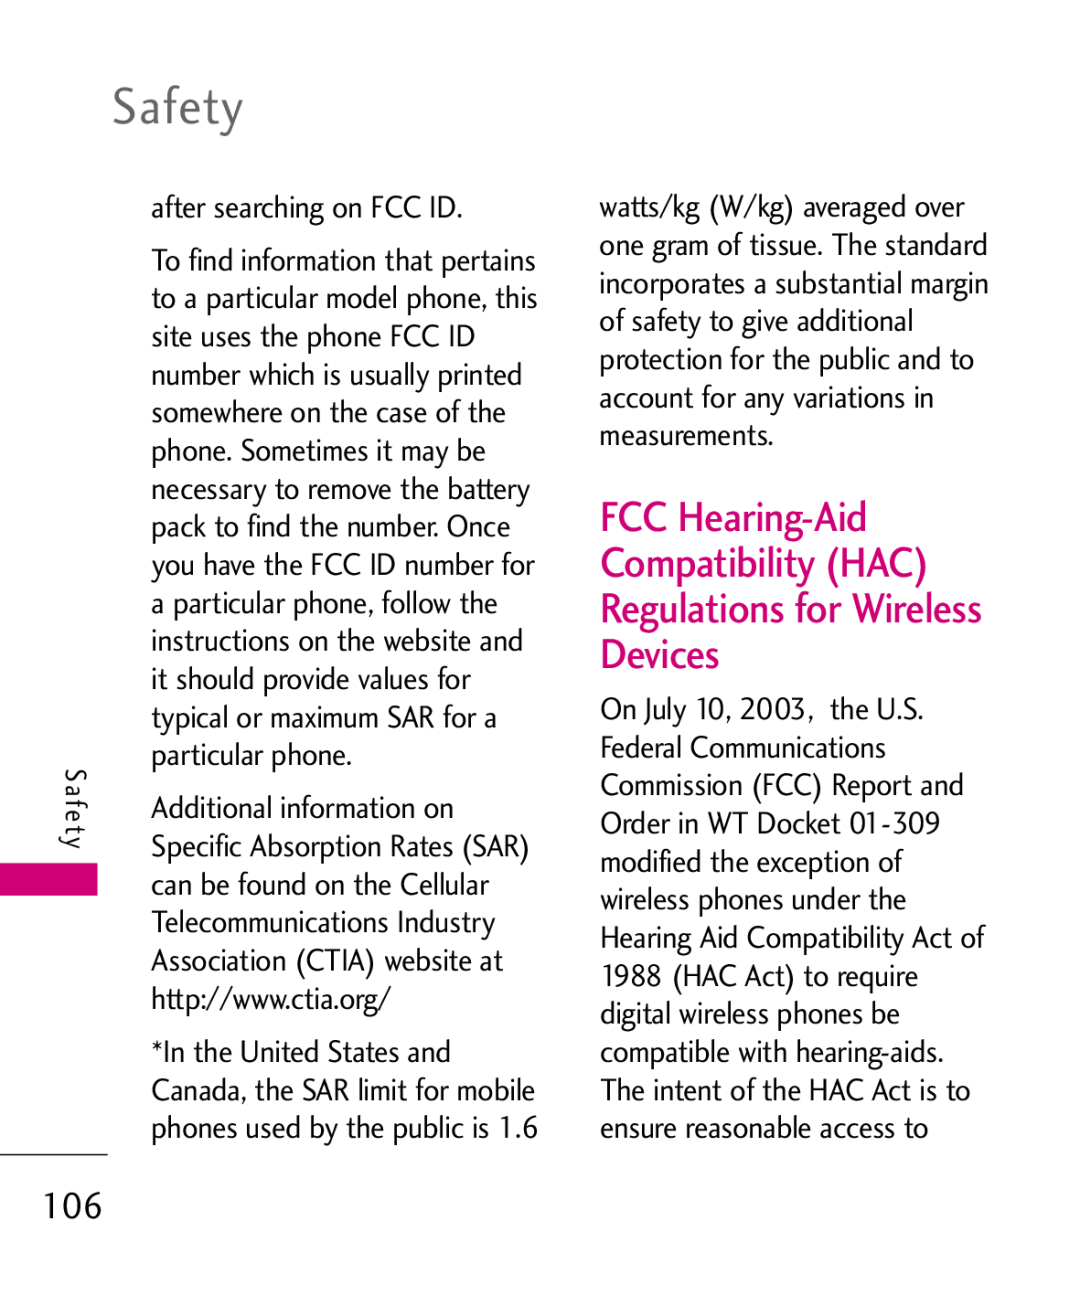 LG Electronics AX310 FCC Hearing-Aid Compatibility HAC Regulations for Wireless Devices, Safety, after searching on FCC ID 